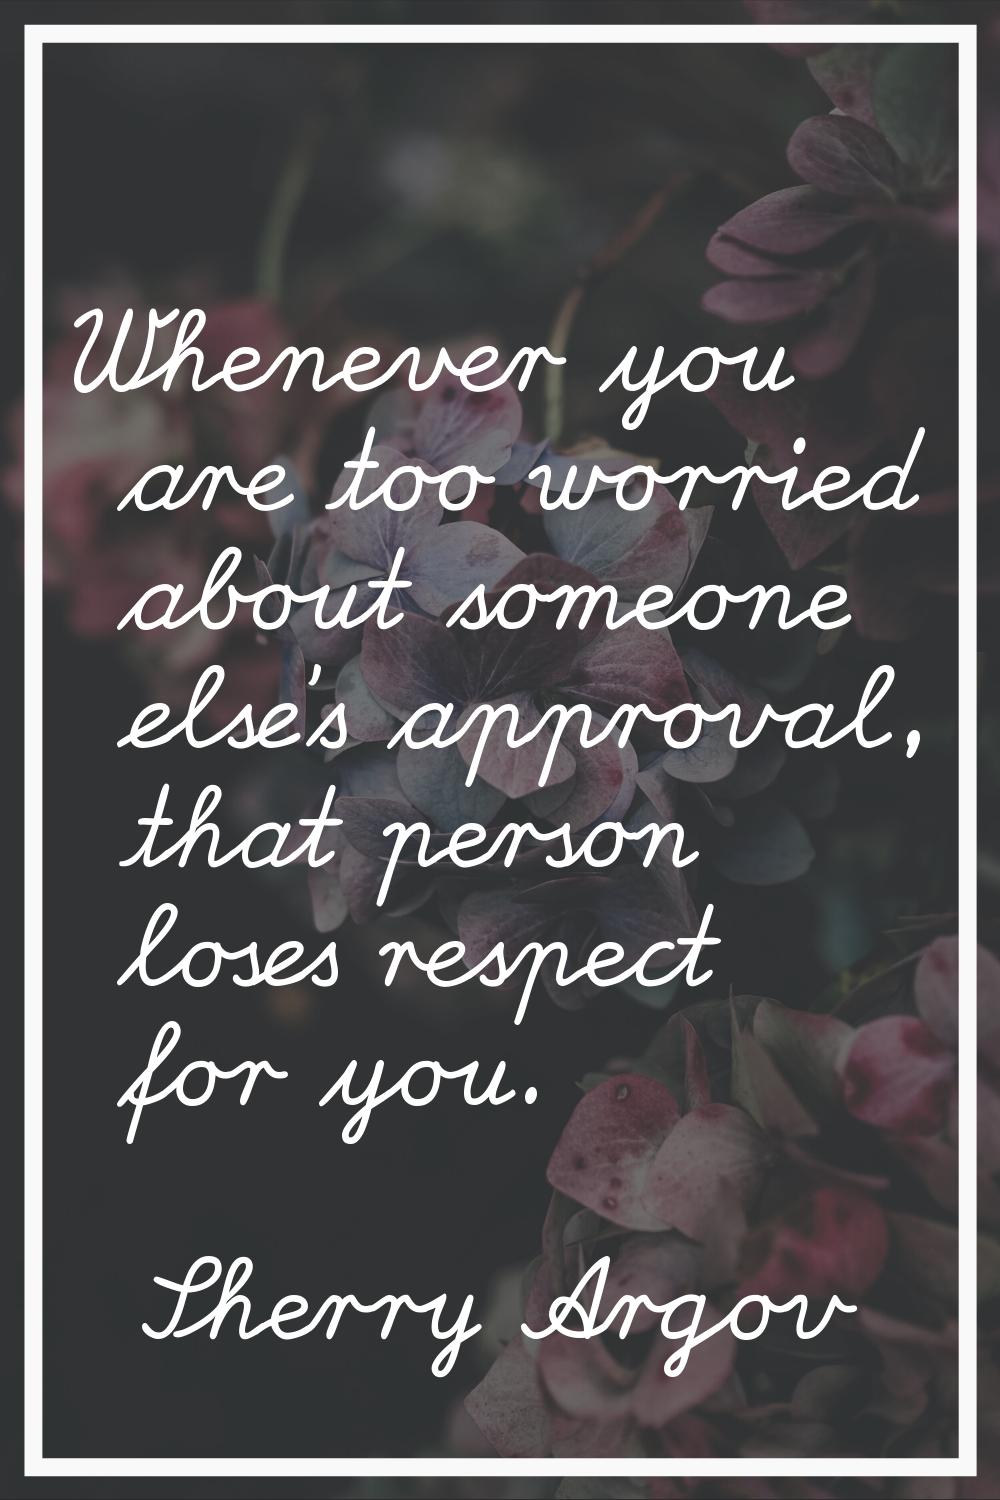 Whenever you are too worried about someone else's approval, that person loses respect for you.